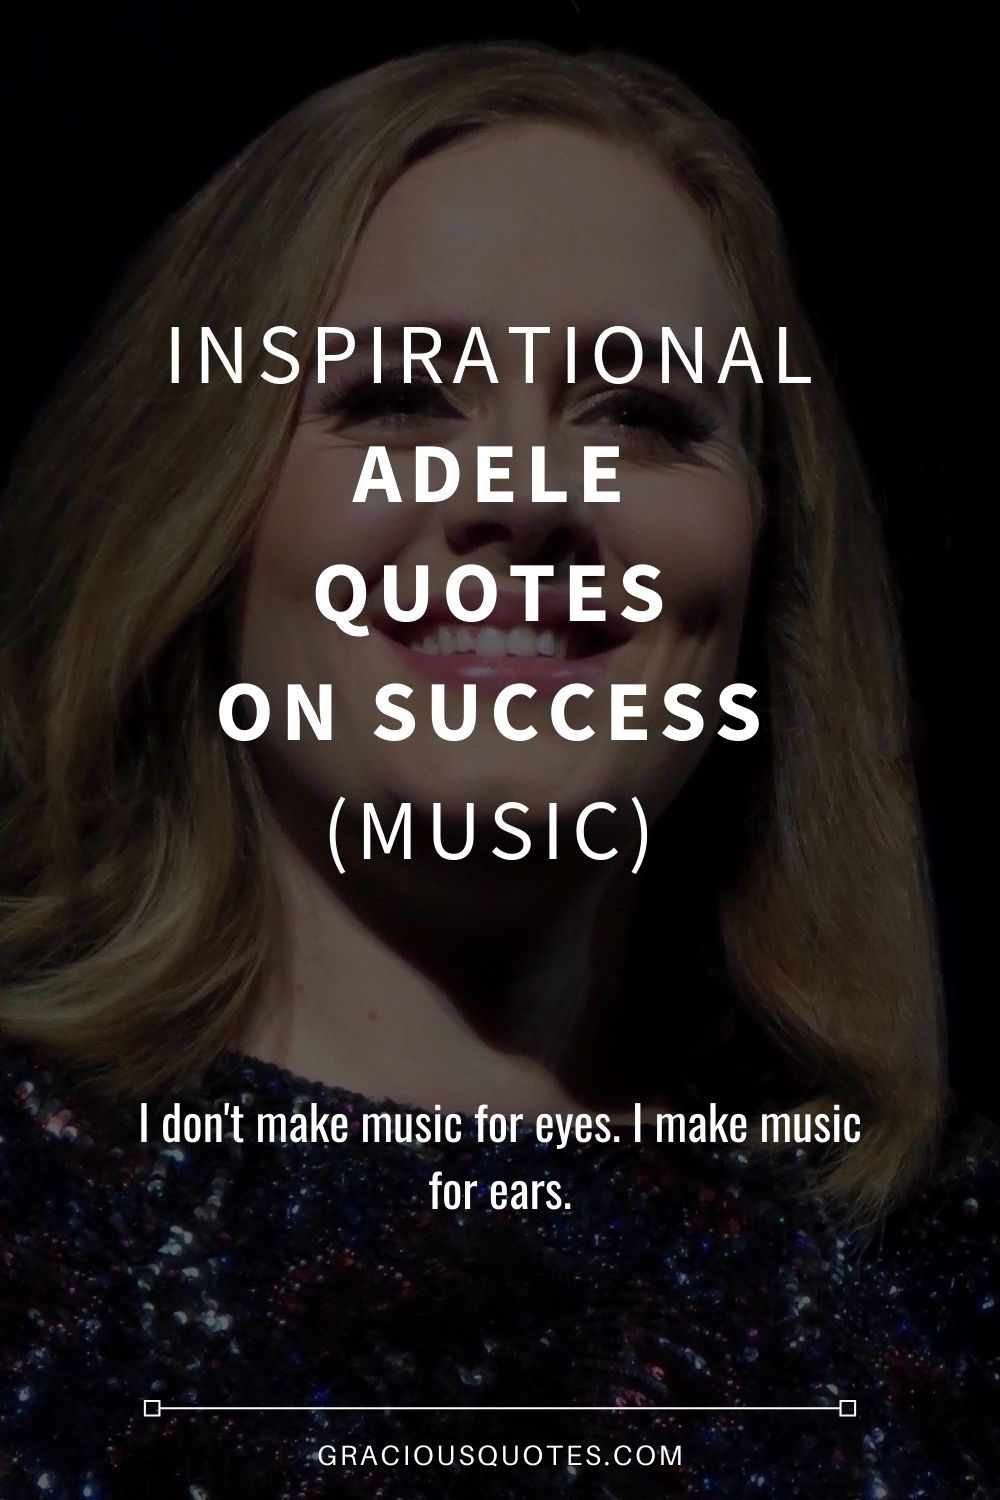 Inspirational Adele Quotes on Success (MUSIC) - Gracious Quotes